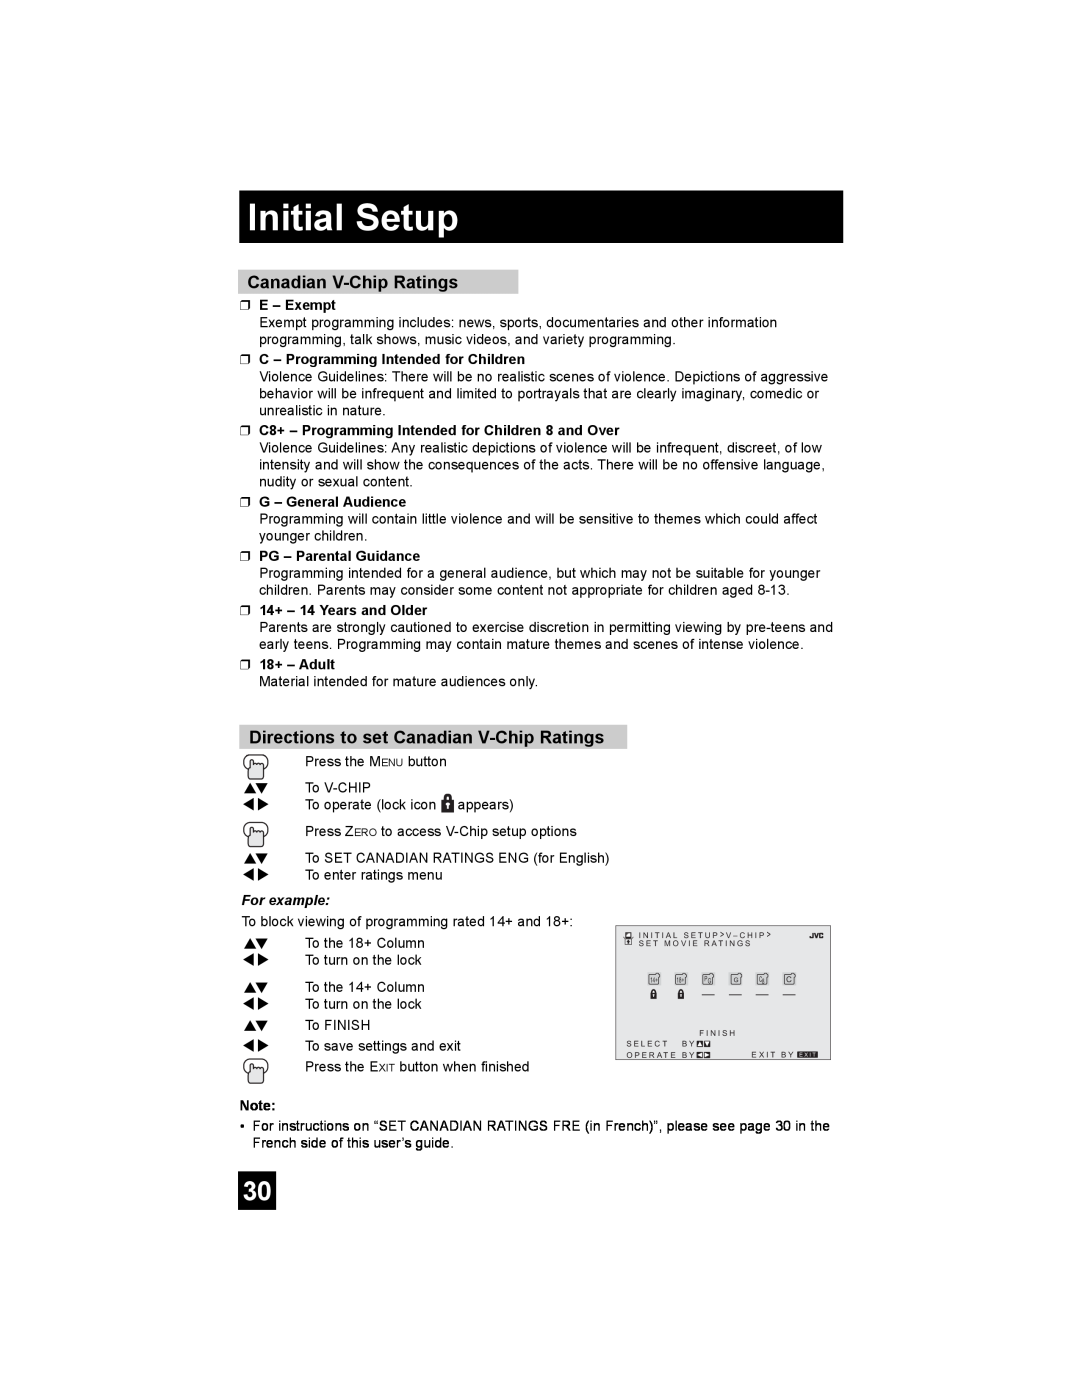 JVC AV 30W476 manual Directions to set Canadian V-Chip Ratings, Initial Setup, For example 